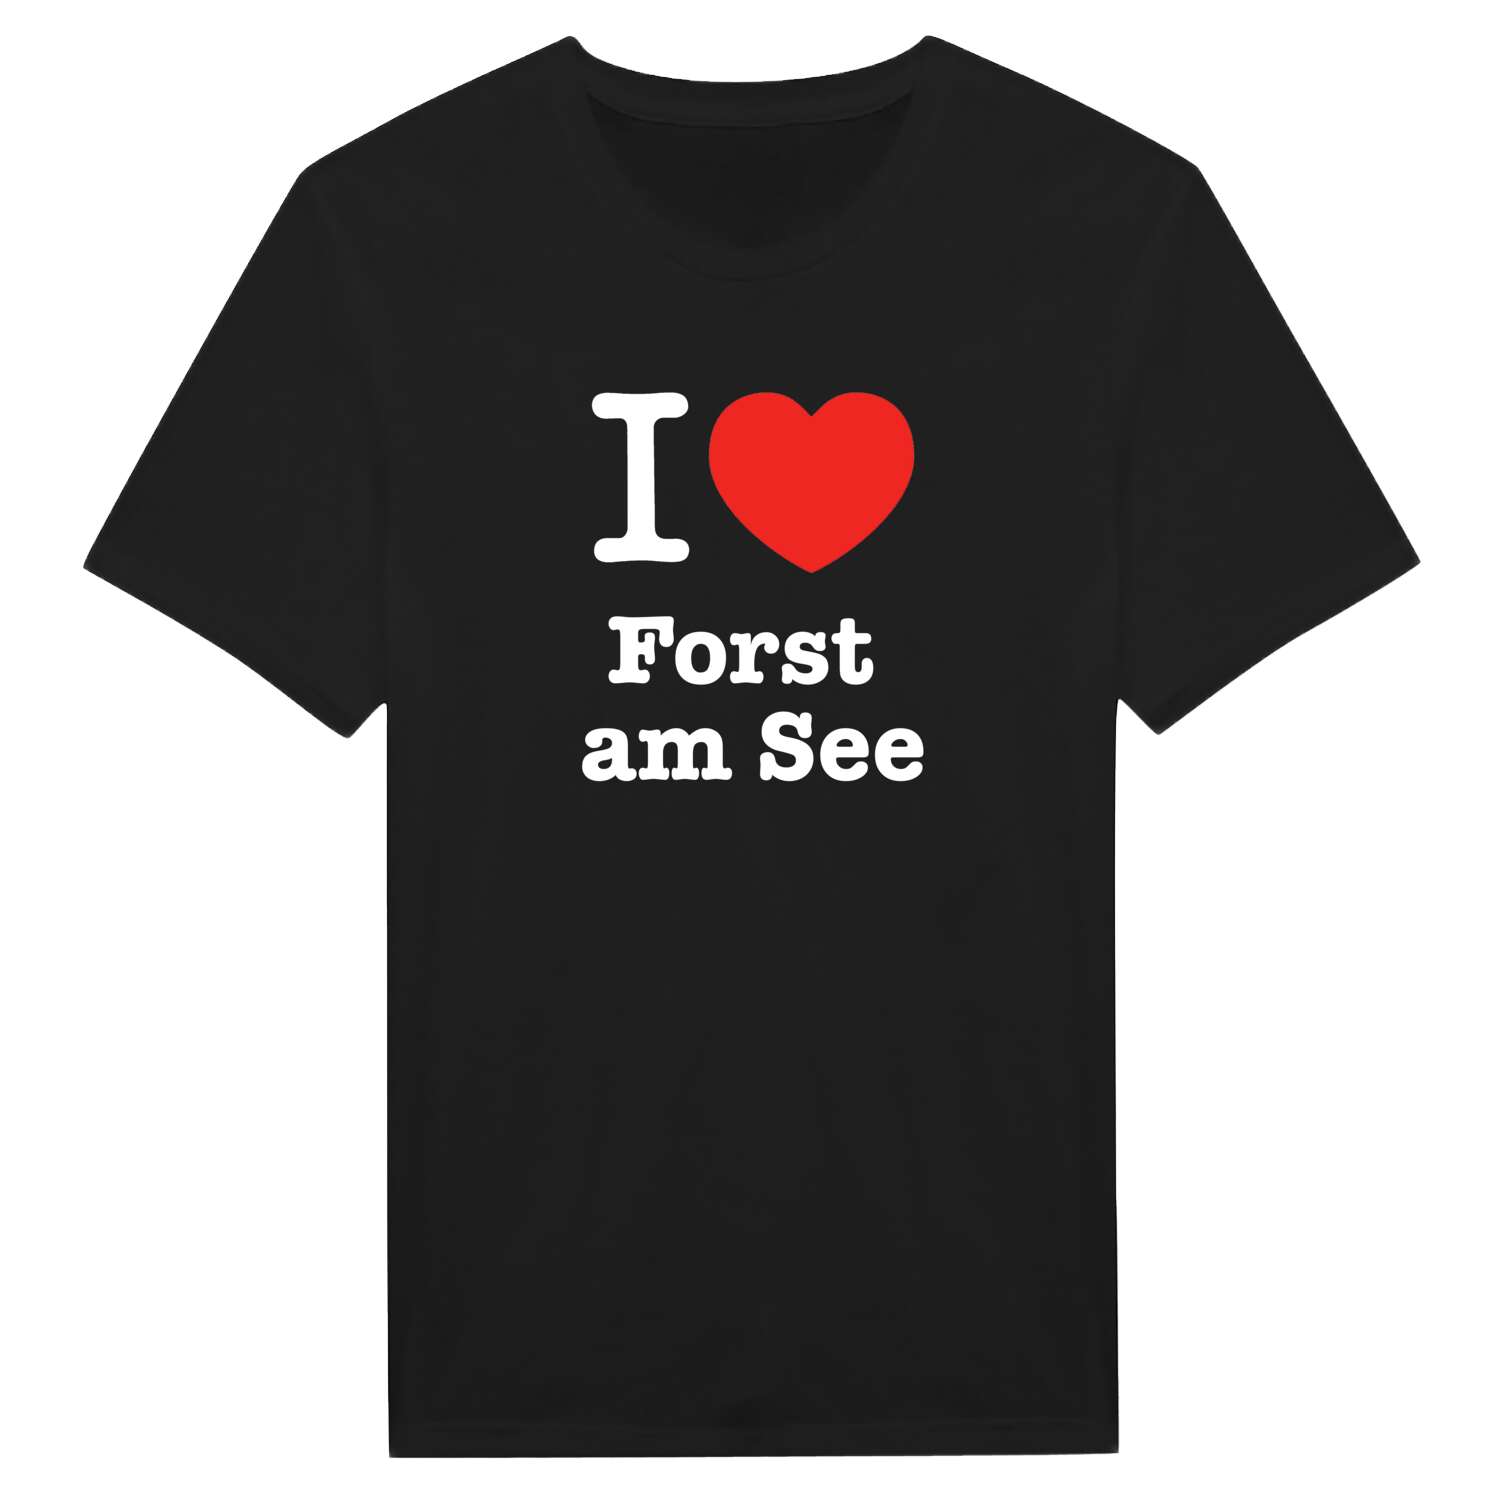 Forst am See T-Shirt »I love«